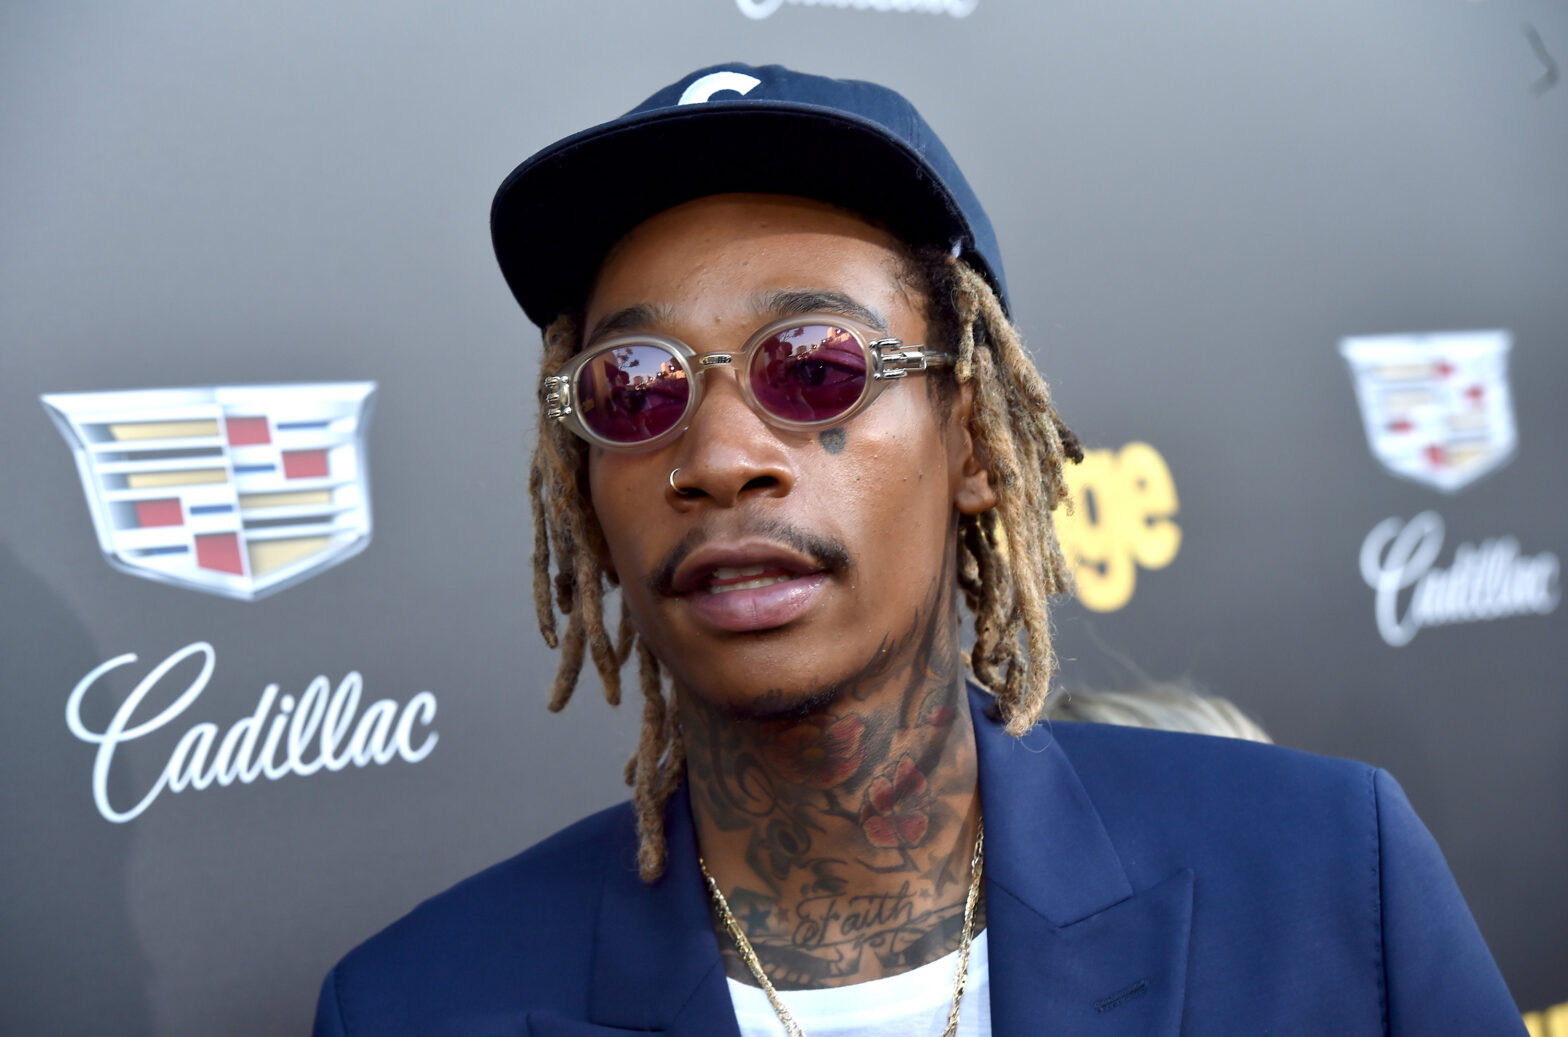 Wiz Khalifa Speaks Out After Being Arrested And Charged With Illegal Drug Possession In Romania